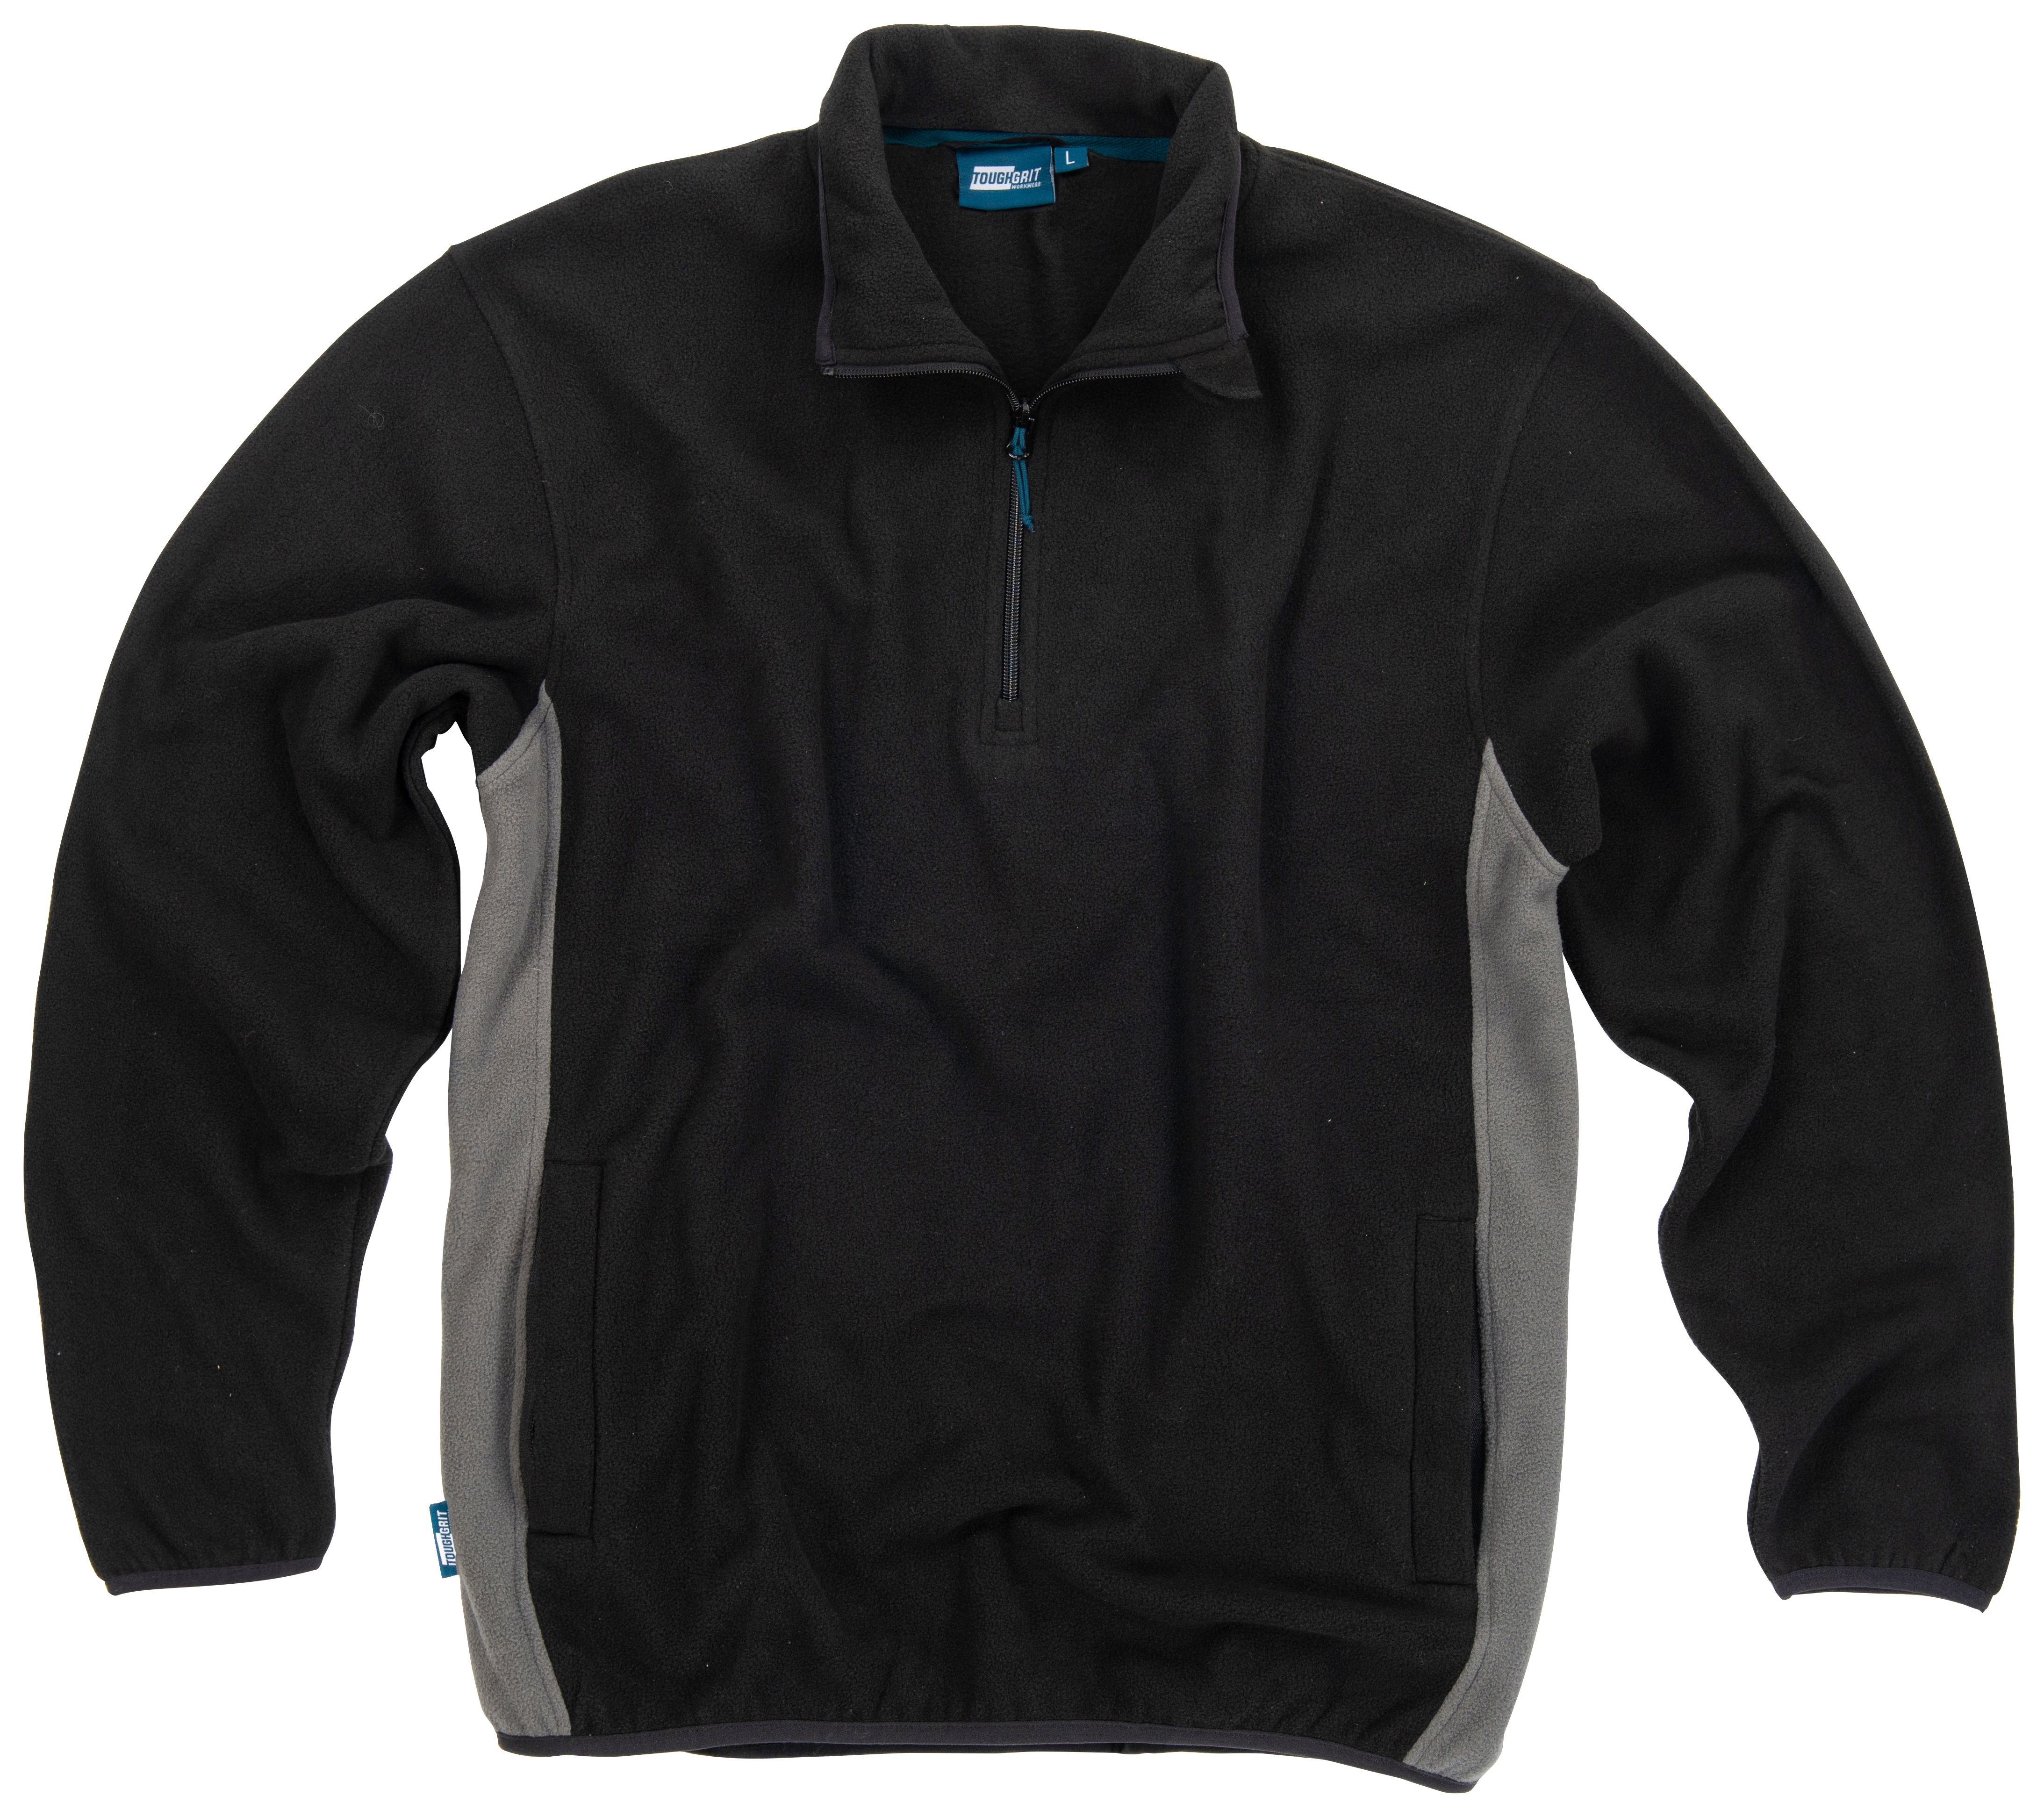 Image of Tough Grit 1/4 Zip Fleece, in Black and Grey Quick-Drying, Size: M